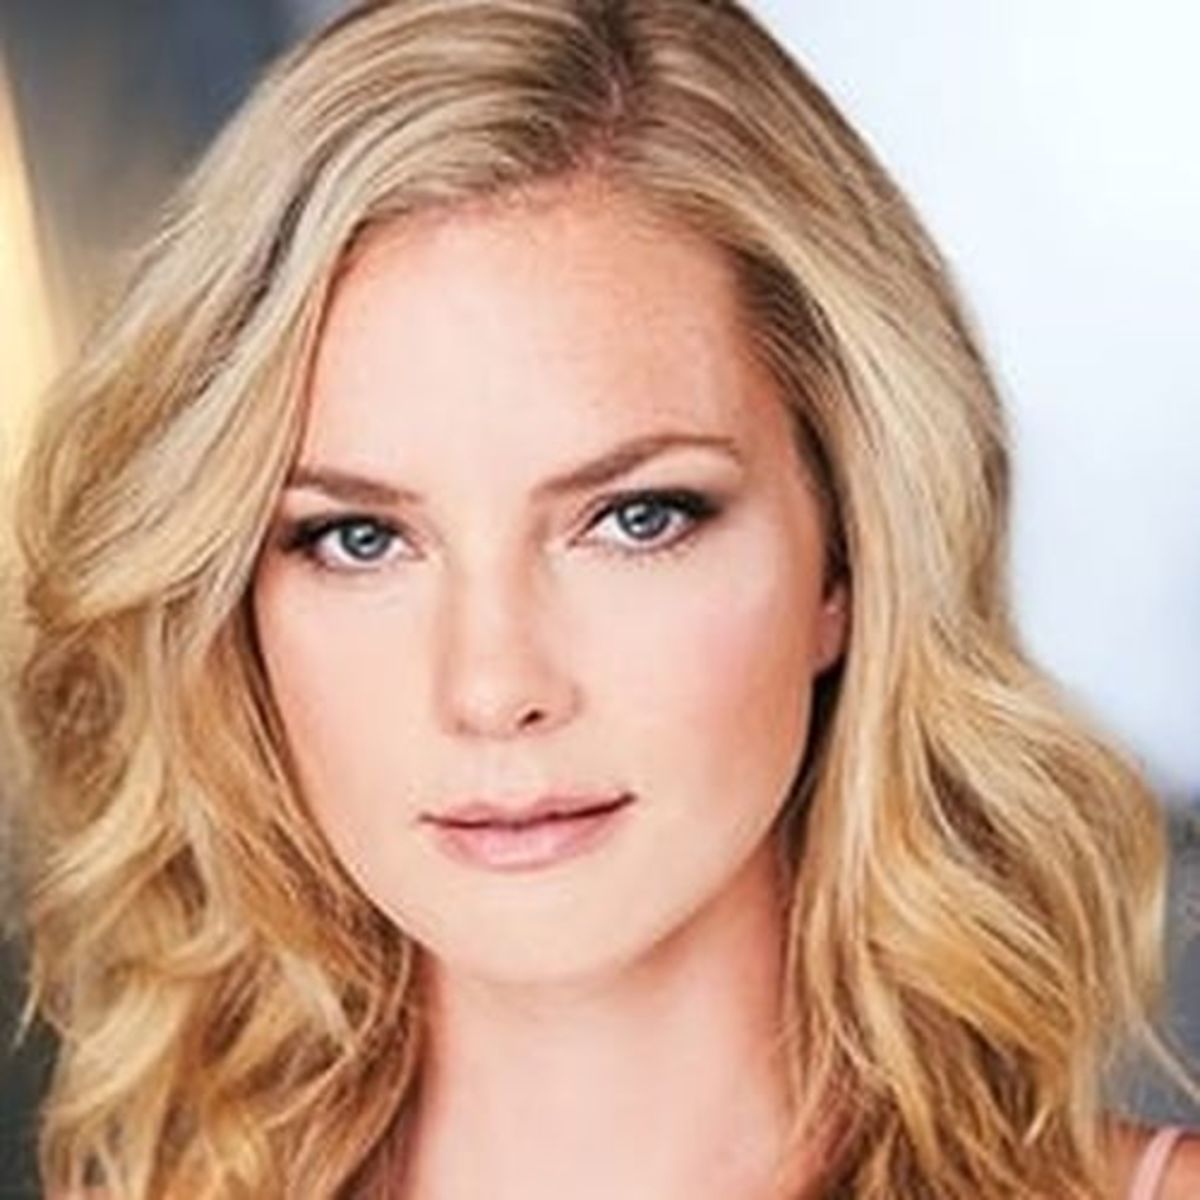 Cindy Busby, a Canadian